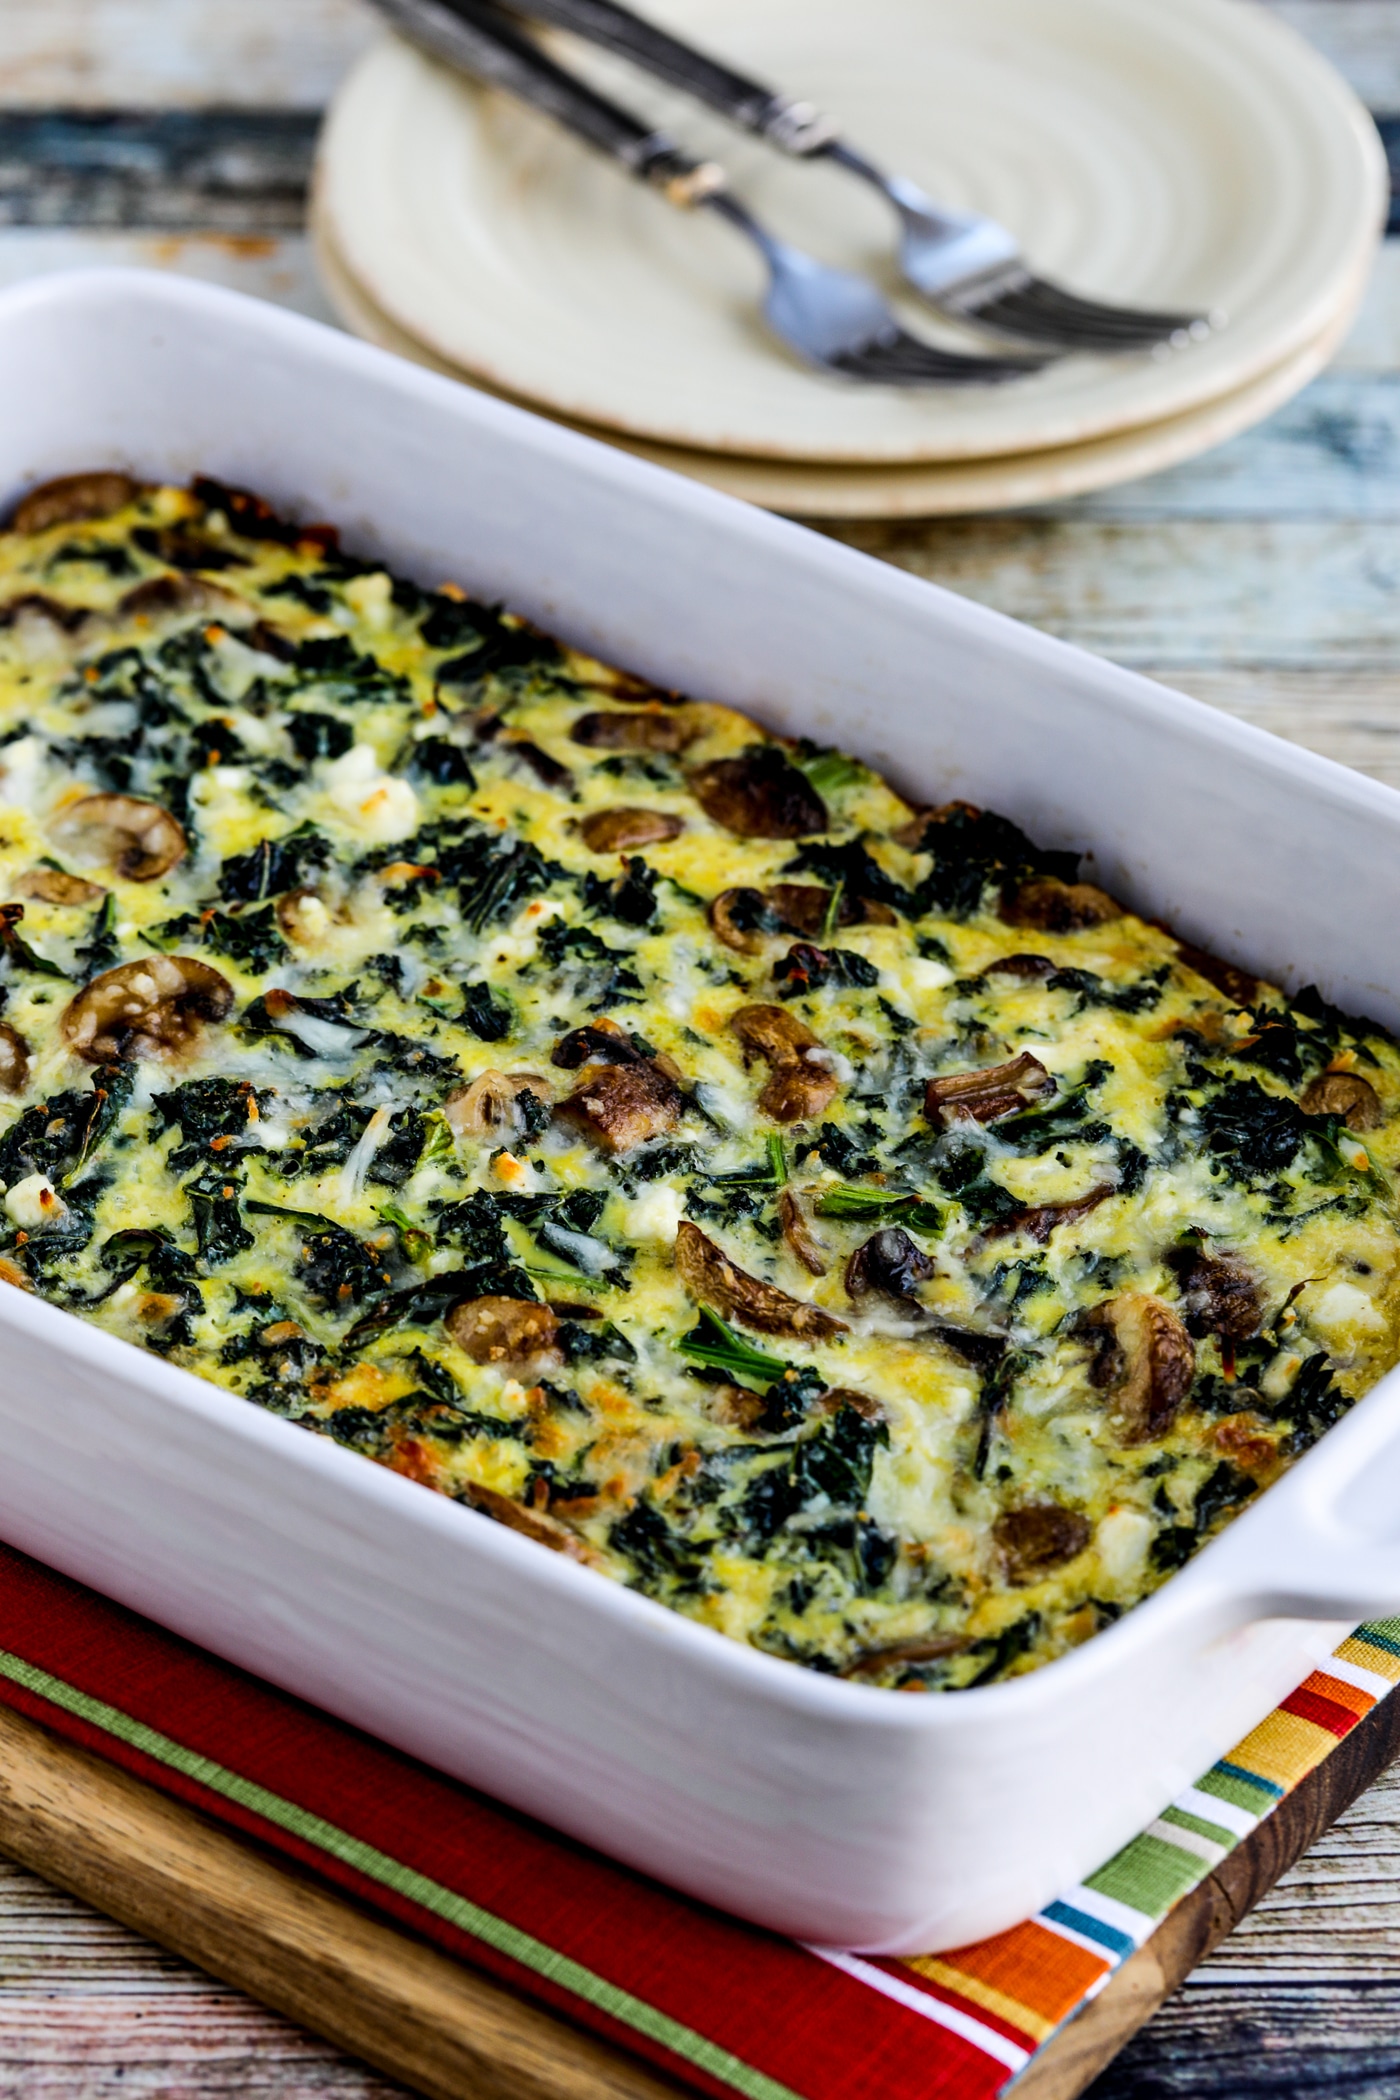 Kale, Mushroom, and Cheese Breakfast Casserole finished casserole in baking dish